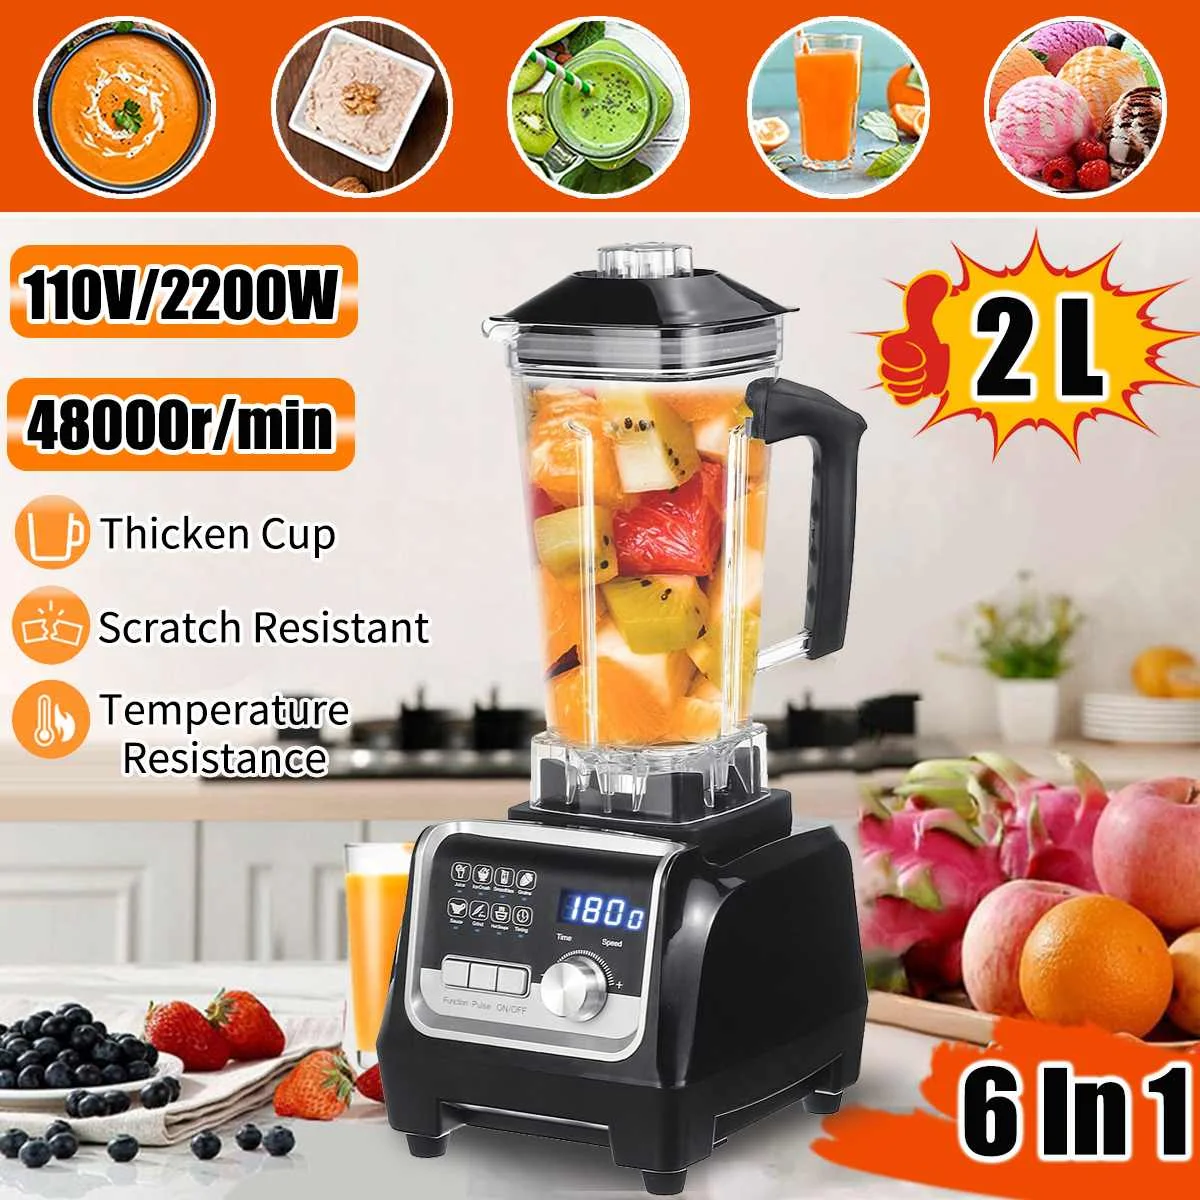 

Digital 3HP BPA FREE 2200W 2L Automatic Touchpad Professional Blender Mixer Juicer High Power Food Processor Ice Smoothies Fruit